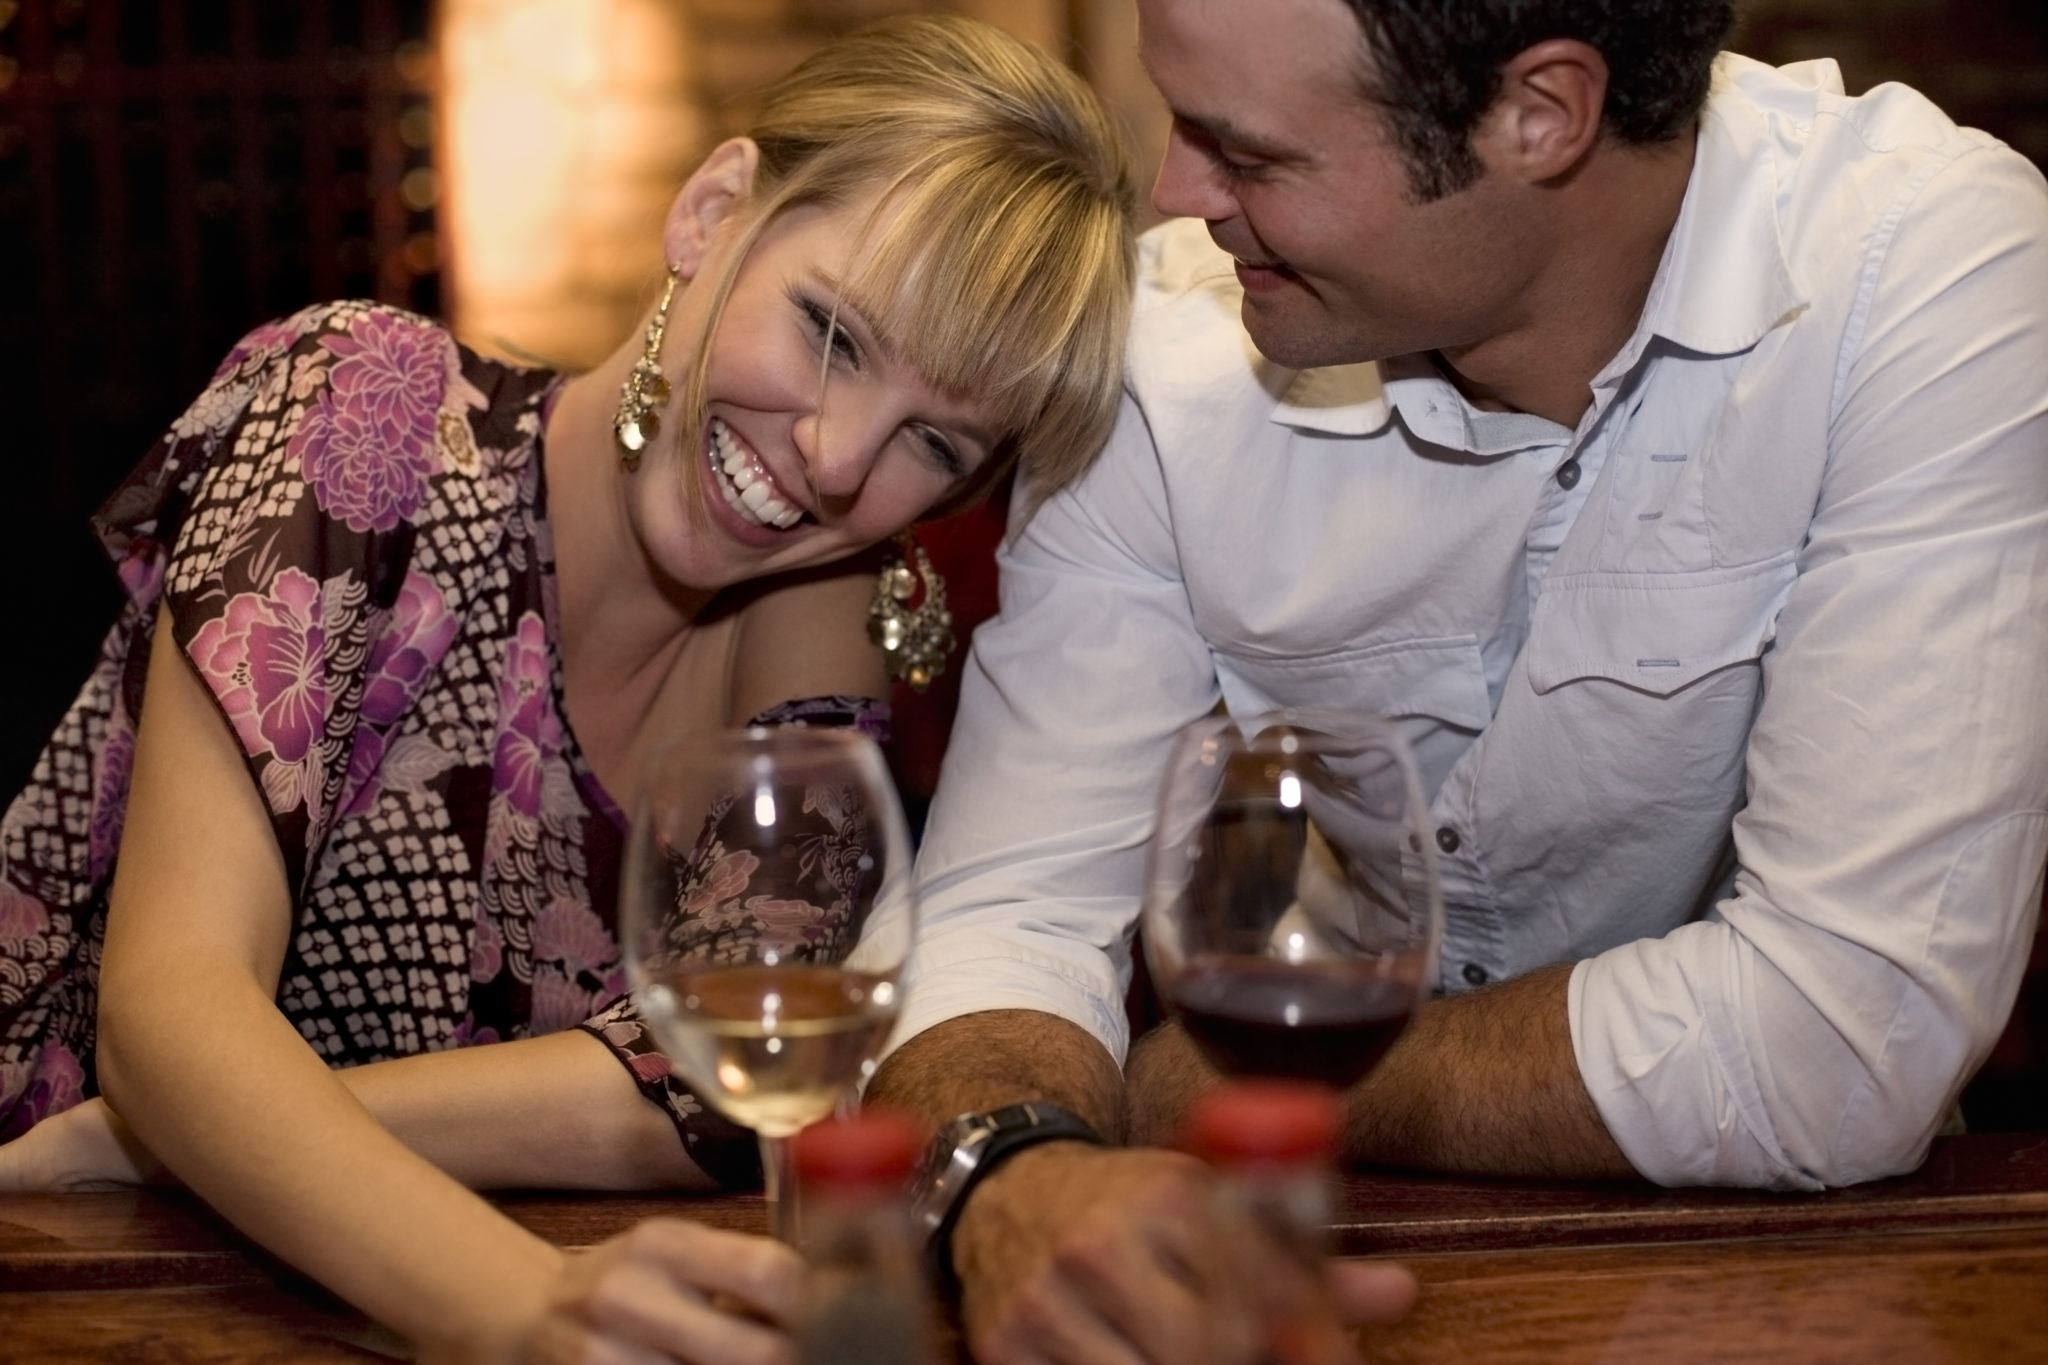 Show them you care with a romantic meal at Scott's on Princes Stre...